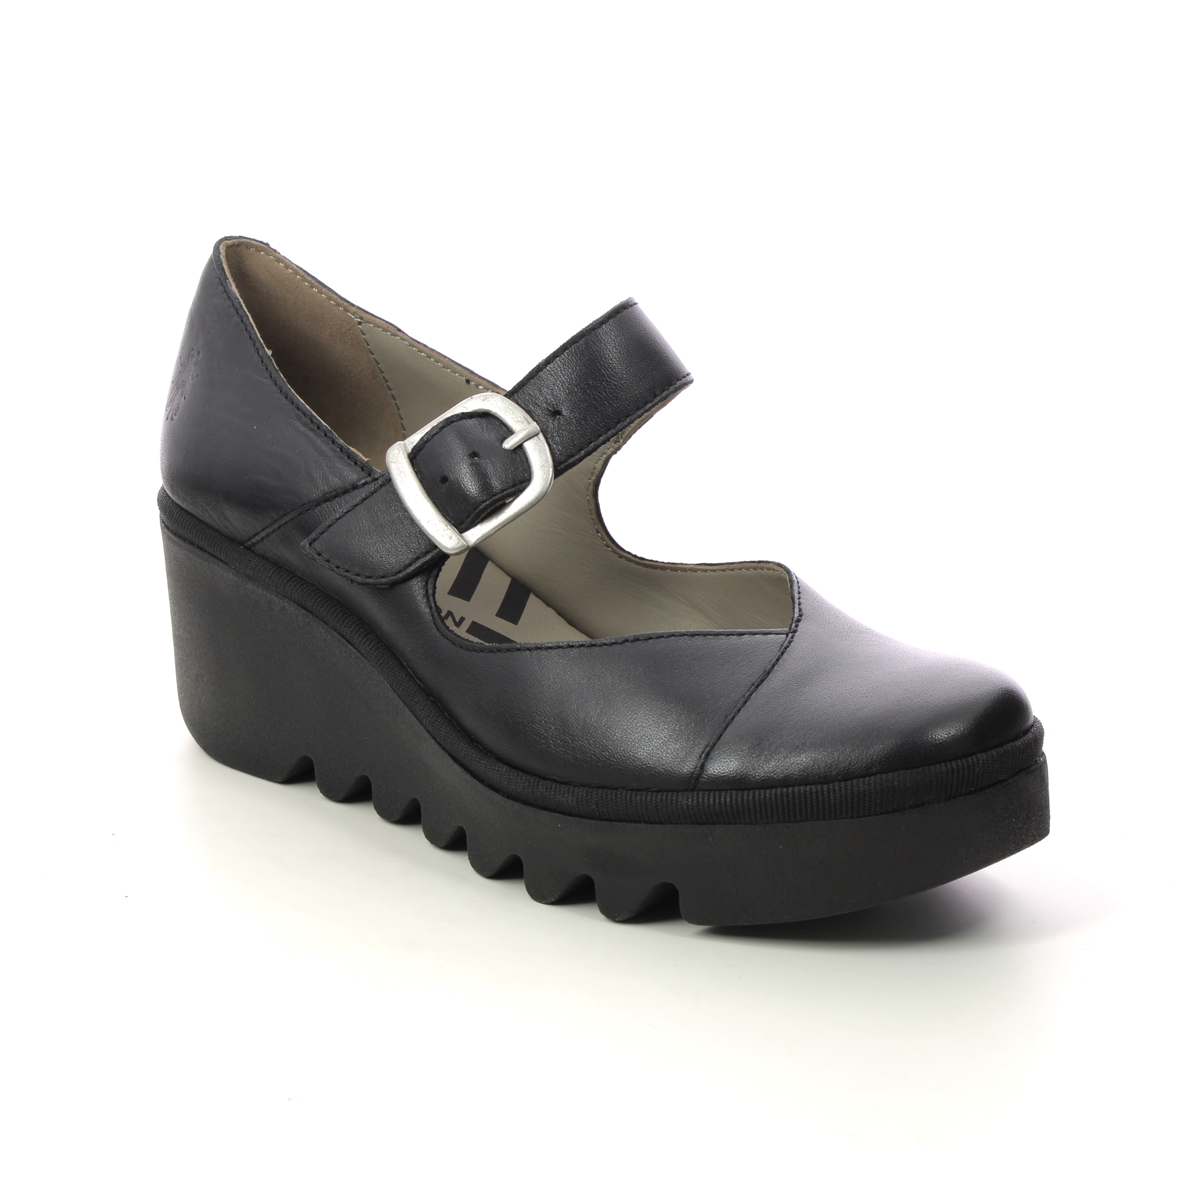 Fly London Baxe Blu Lmj Black leather Womens Wedge Shoes P501428-006